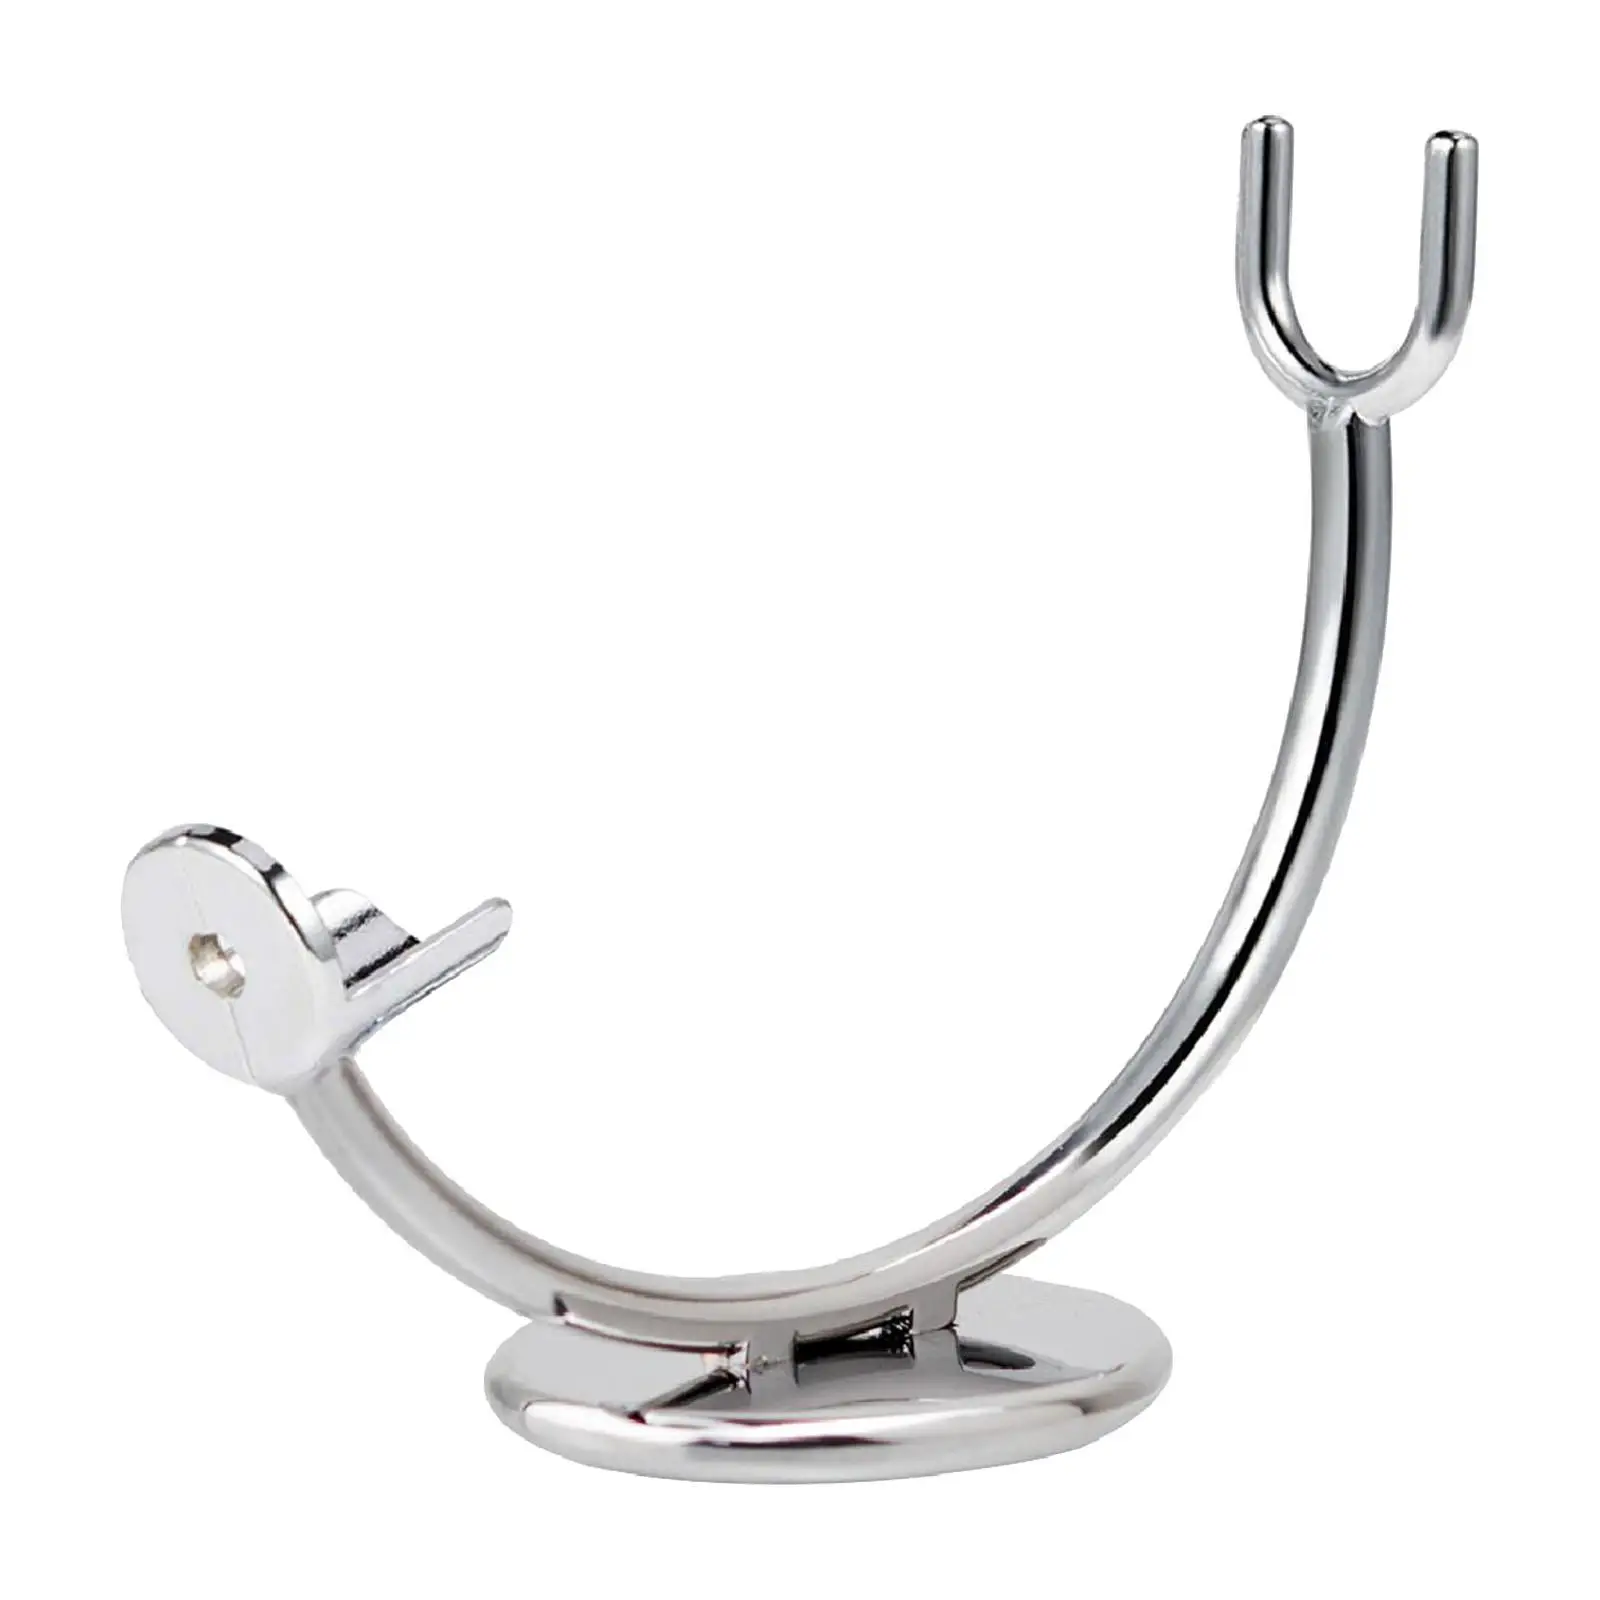 Straight Razor Stand Curved Stand Razor Holder Polished Metal Stable Bottom for Wet Shaving Man Functional Organizer Accessories